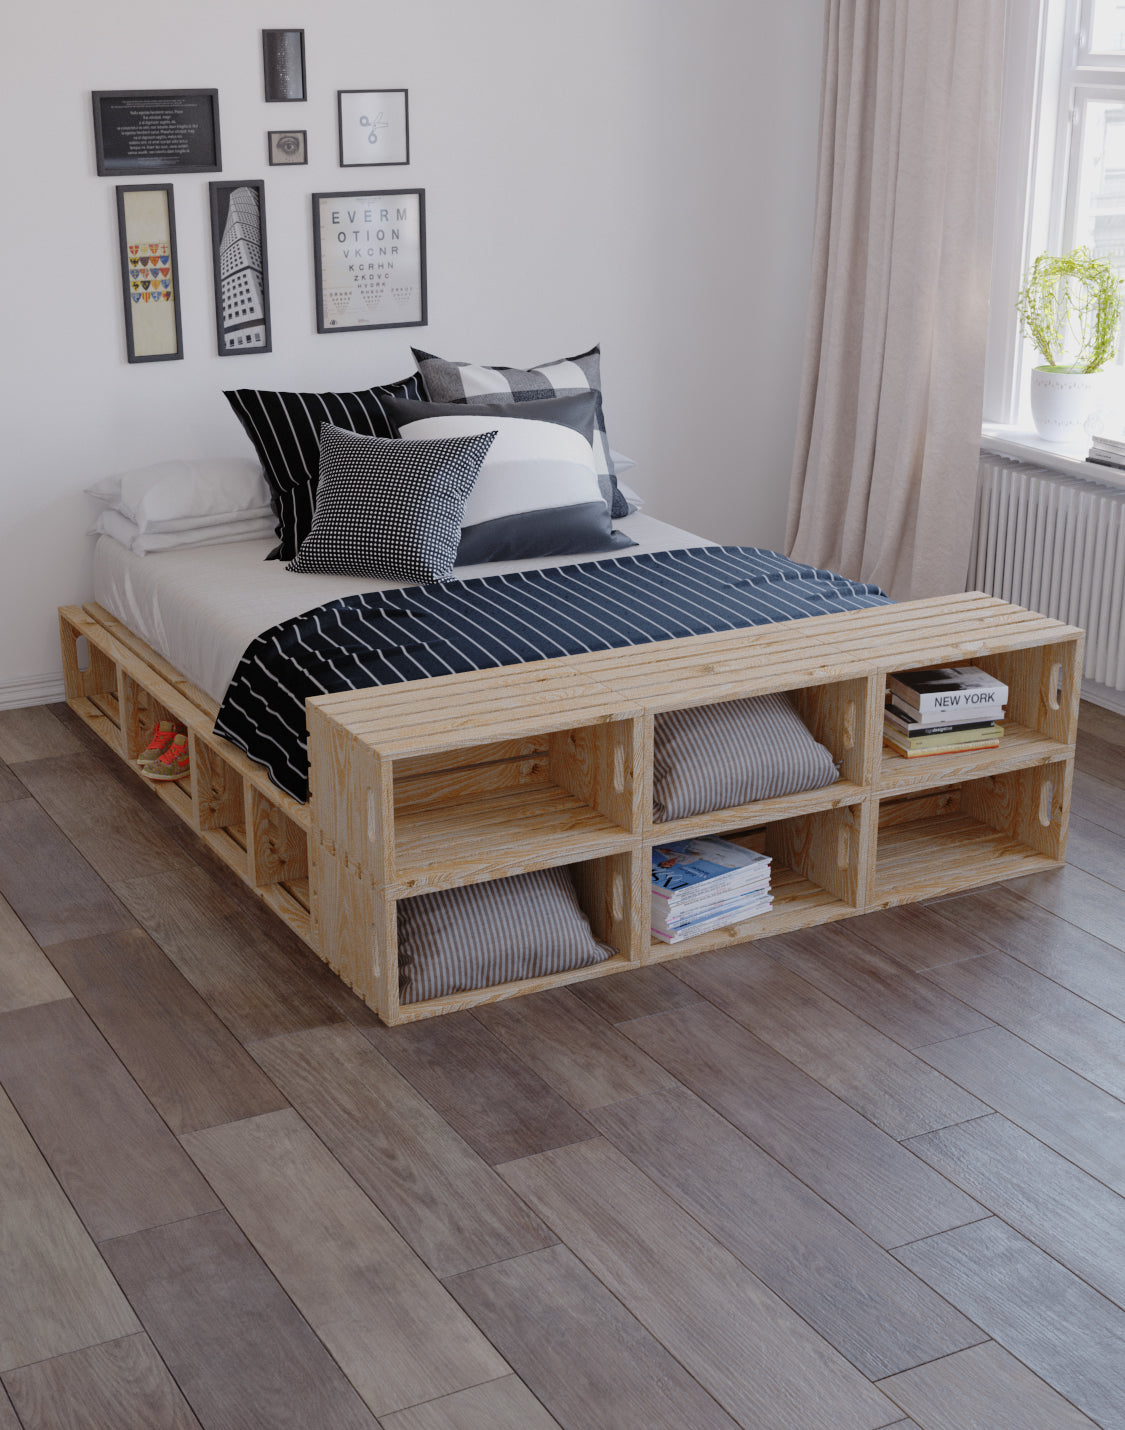 GERARD Multi-Storage Bed Modular And real wood furniture product 